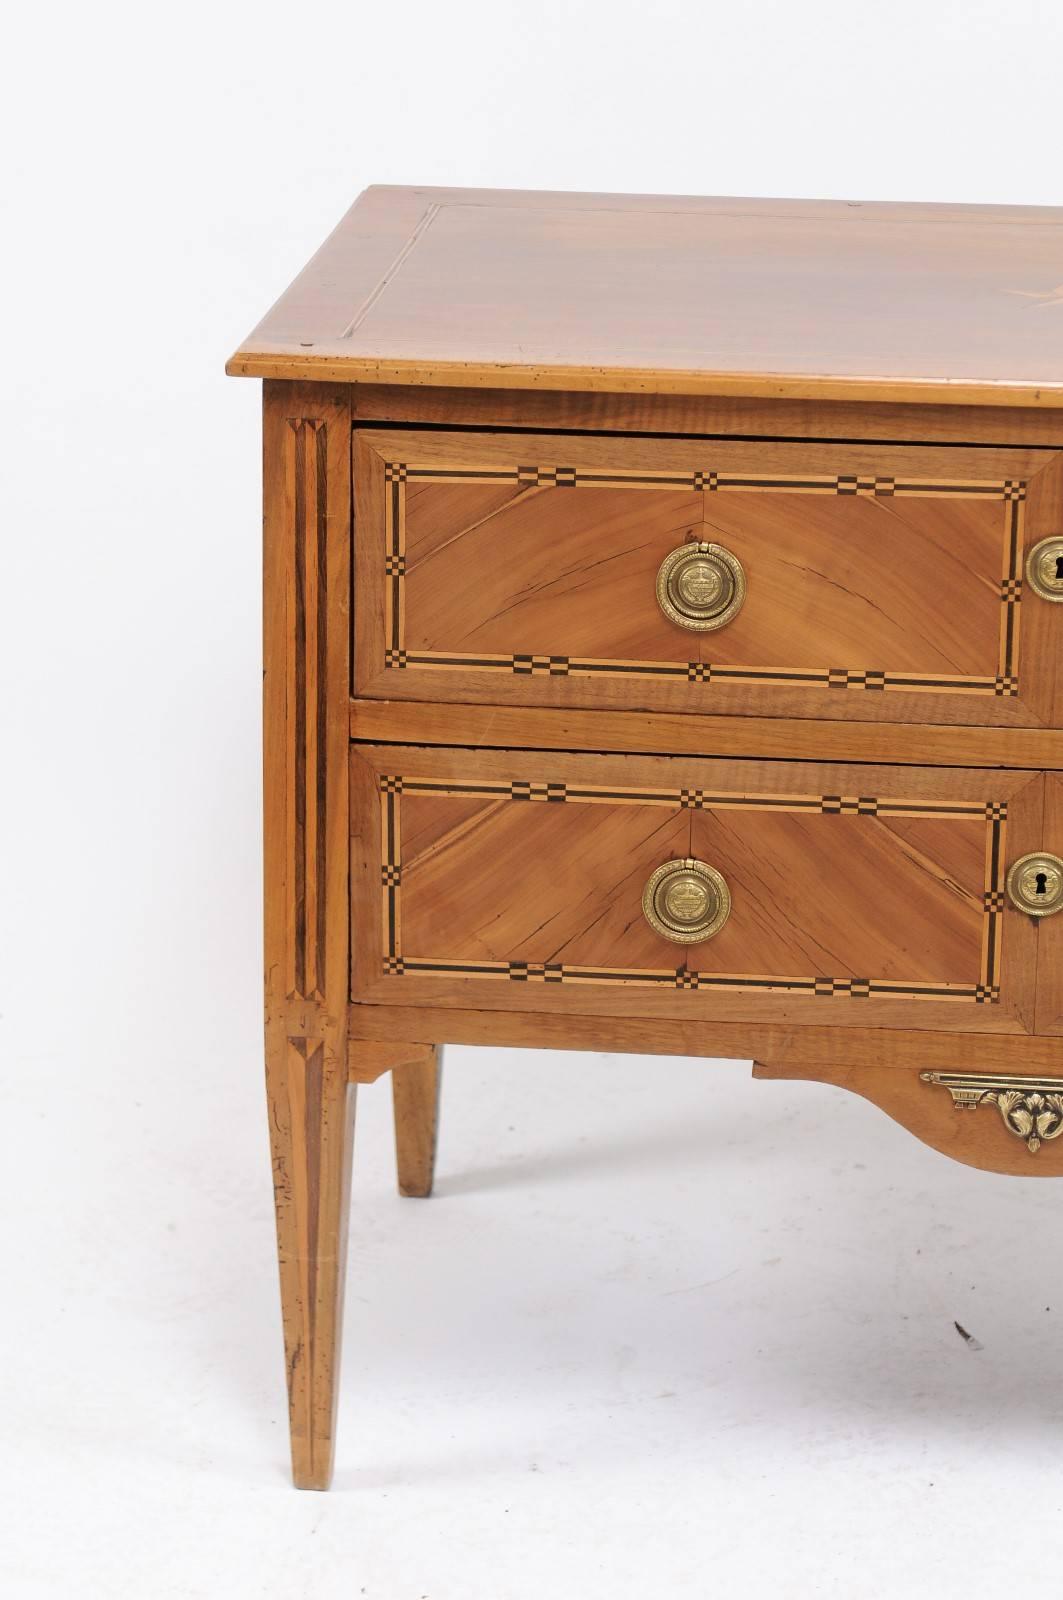 Louis XVI Period French Walnut Commode with Marquetry Décor, Late 18th Century 5